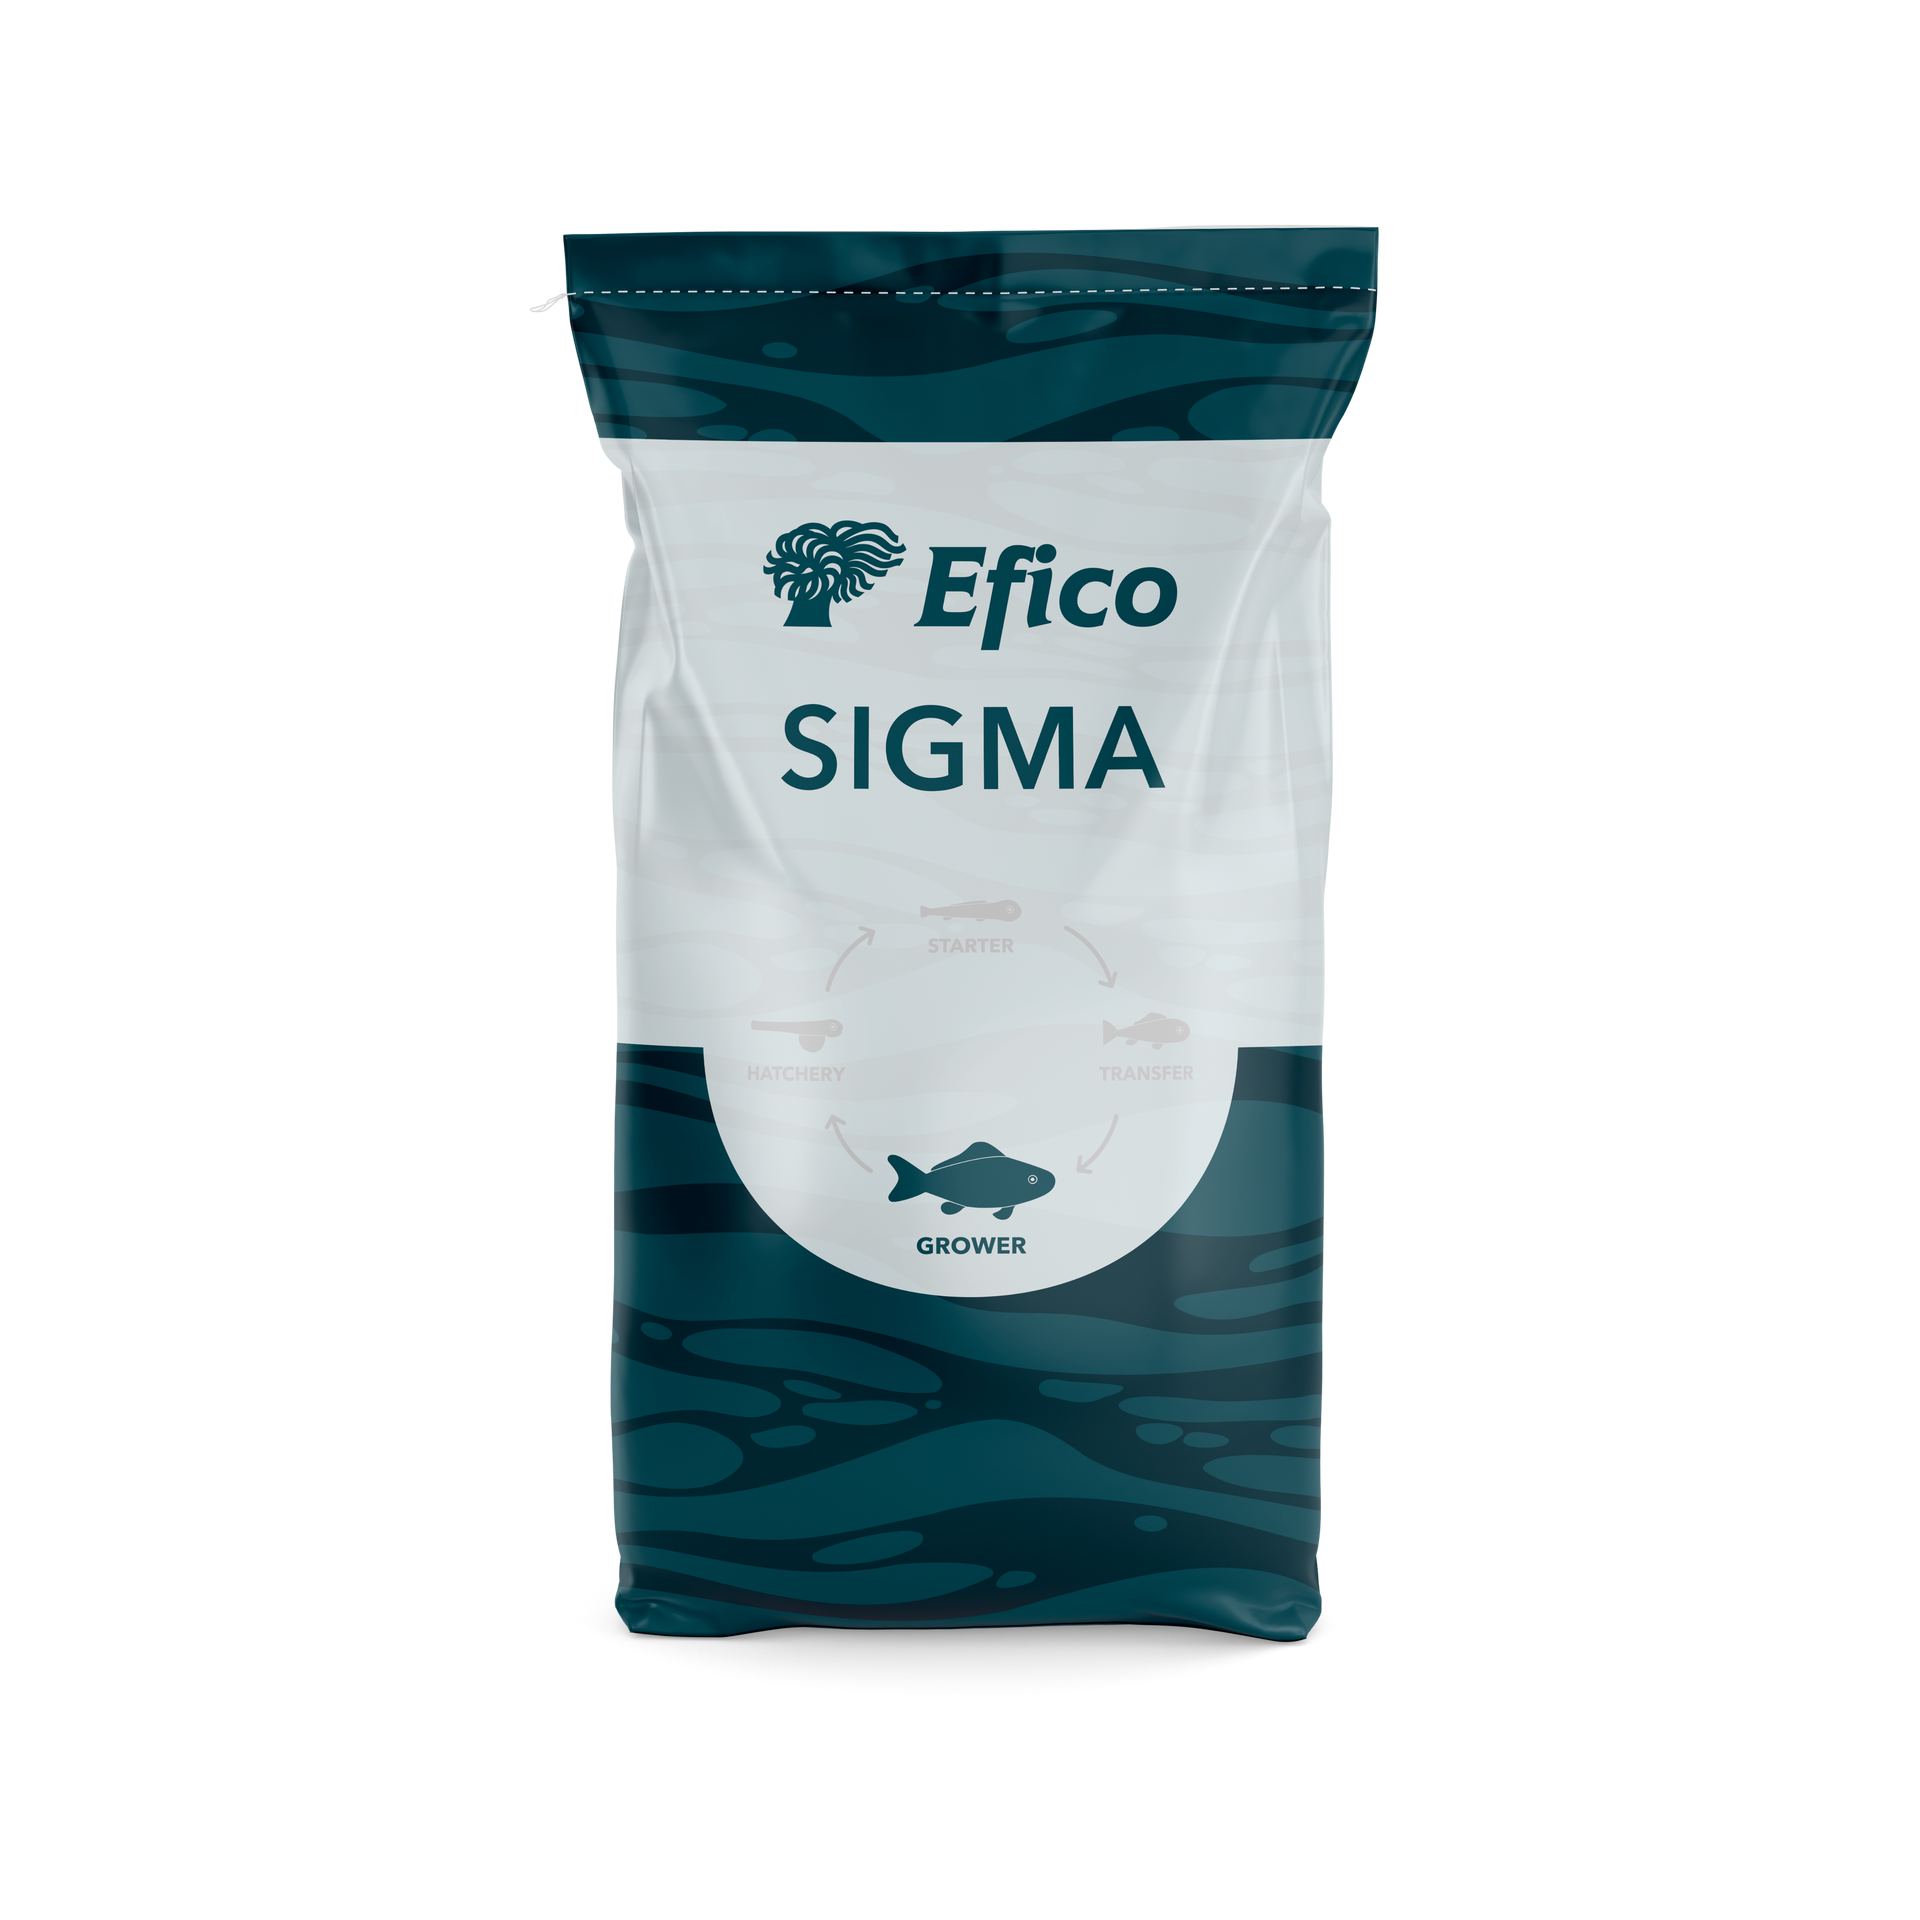 BioMar's Efico Sigma feed for sole in RAS